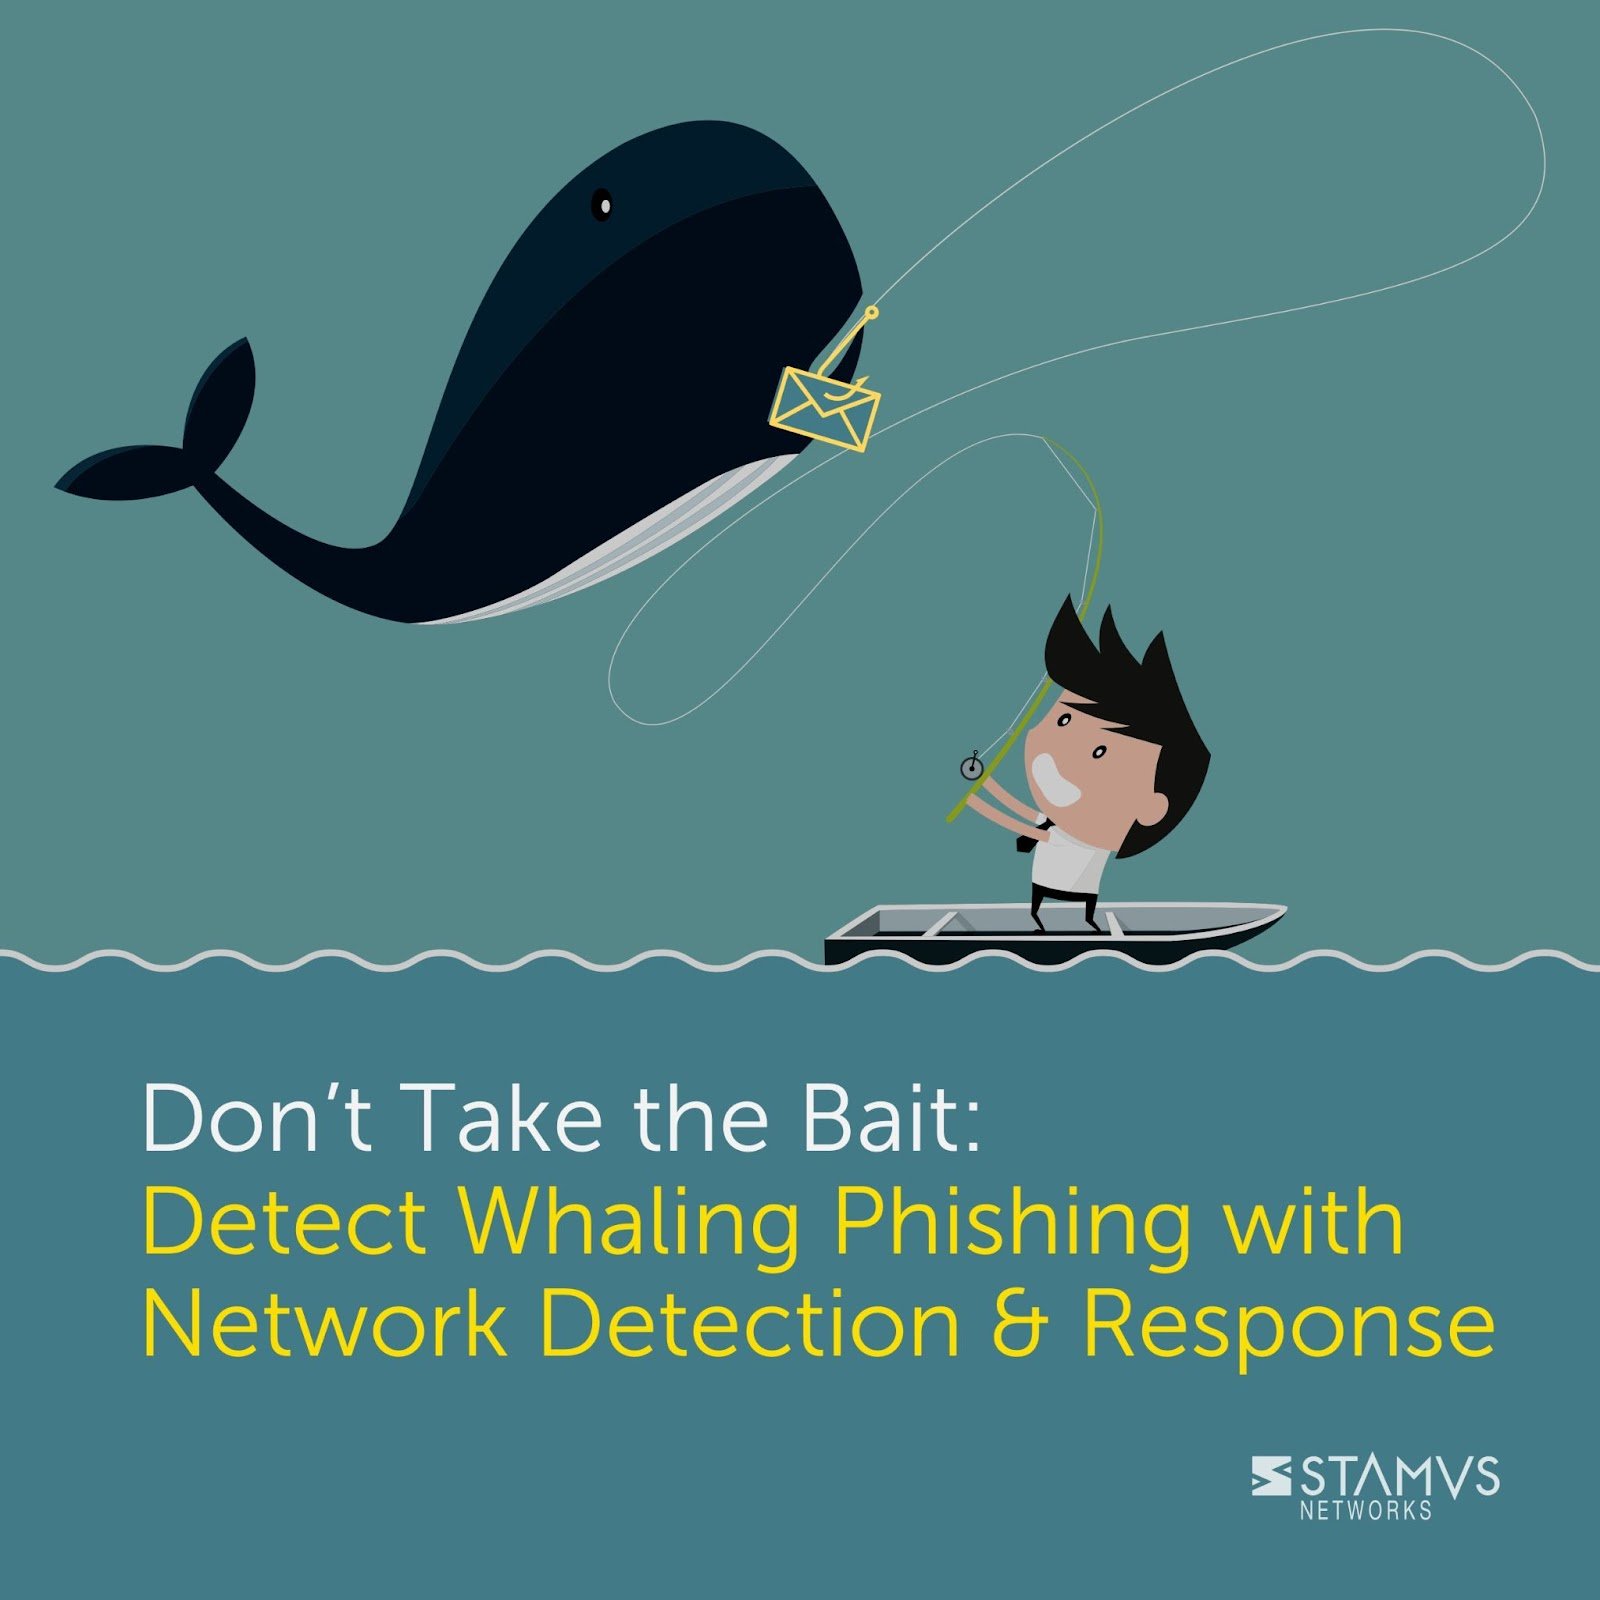 Fishing, Phishing and Network Security: It's all connected